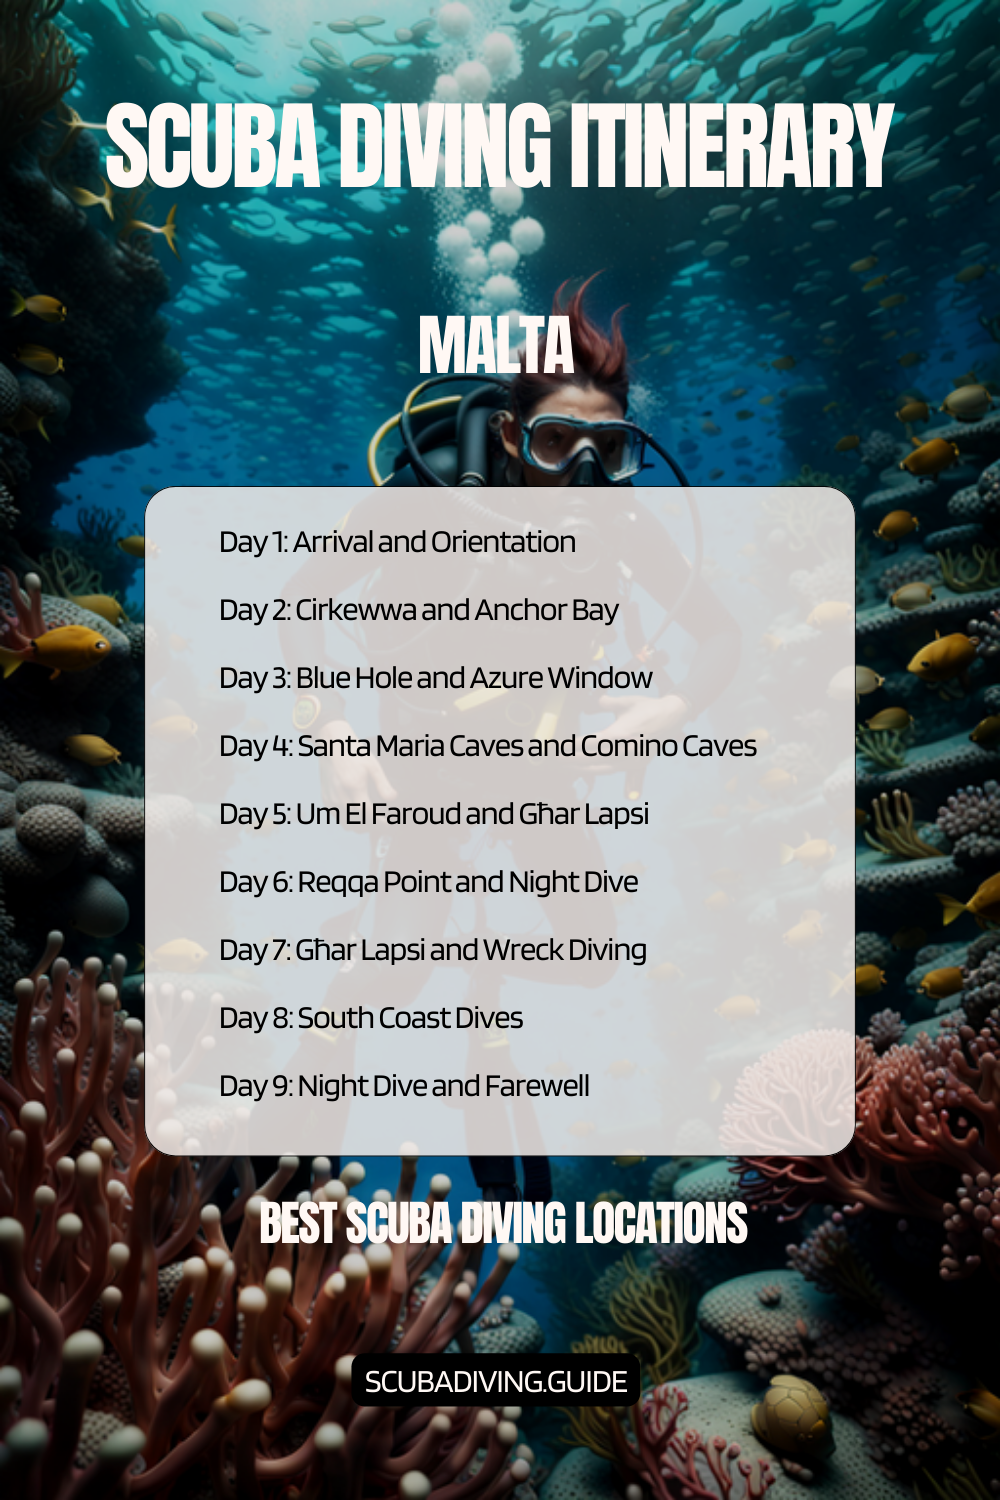 Malta Recommended Scuba Diving Itinerary